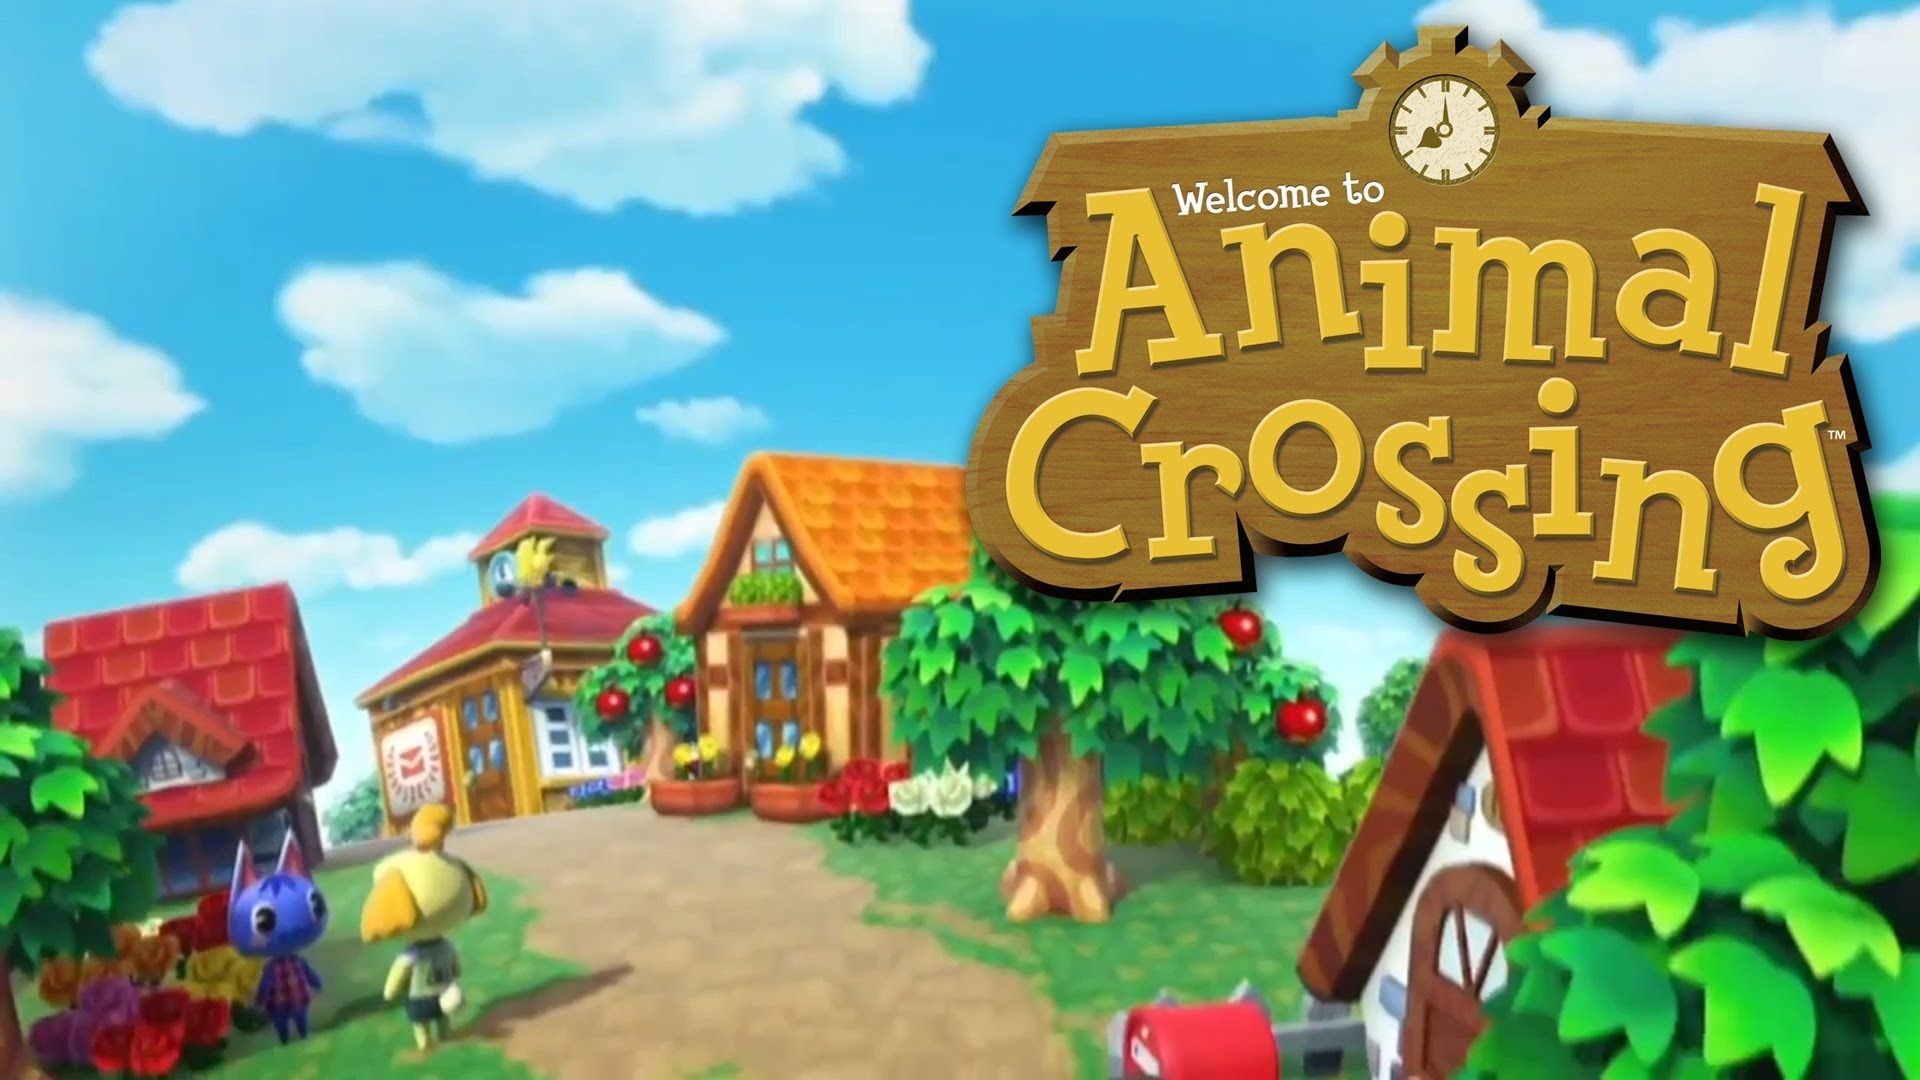 1920x1080 ... Wallpapers Hd Animal Crossing Pic Wpe0012464. Download